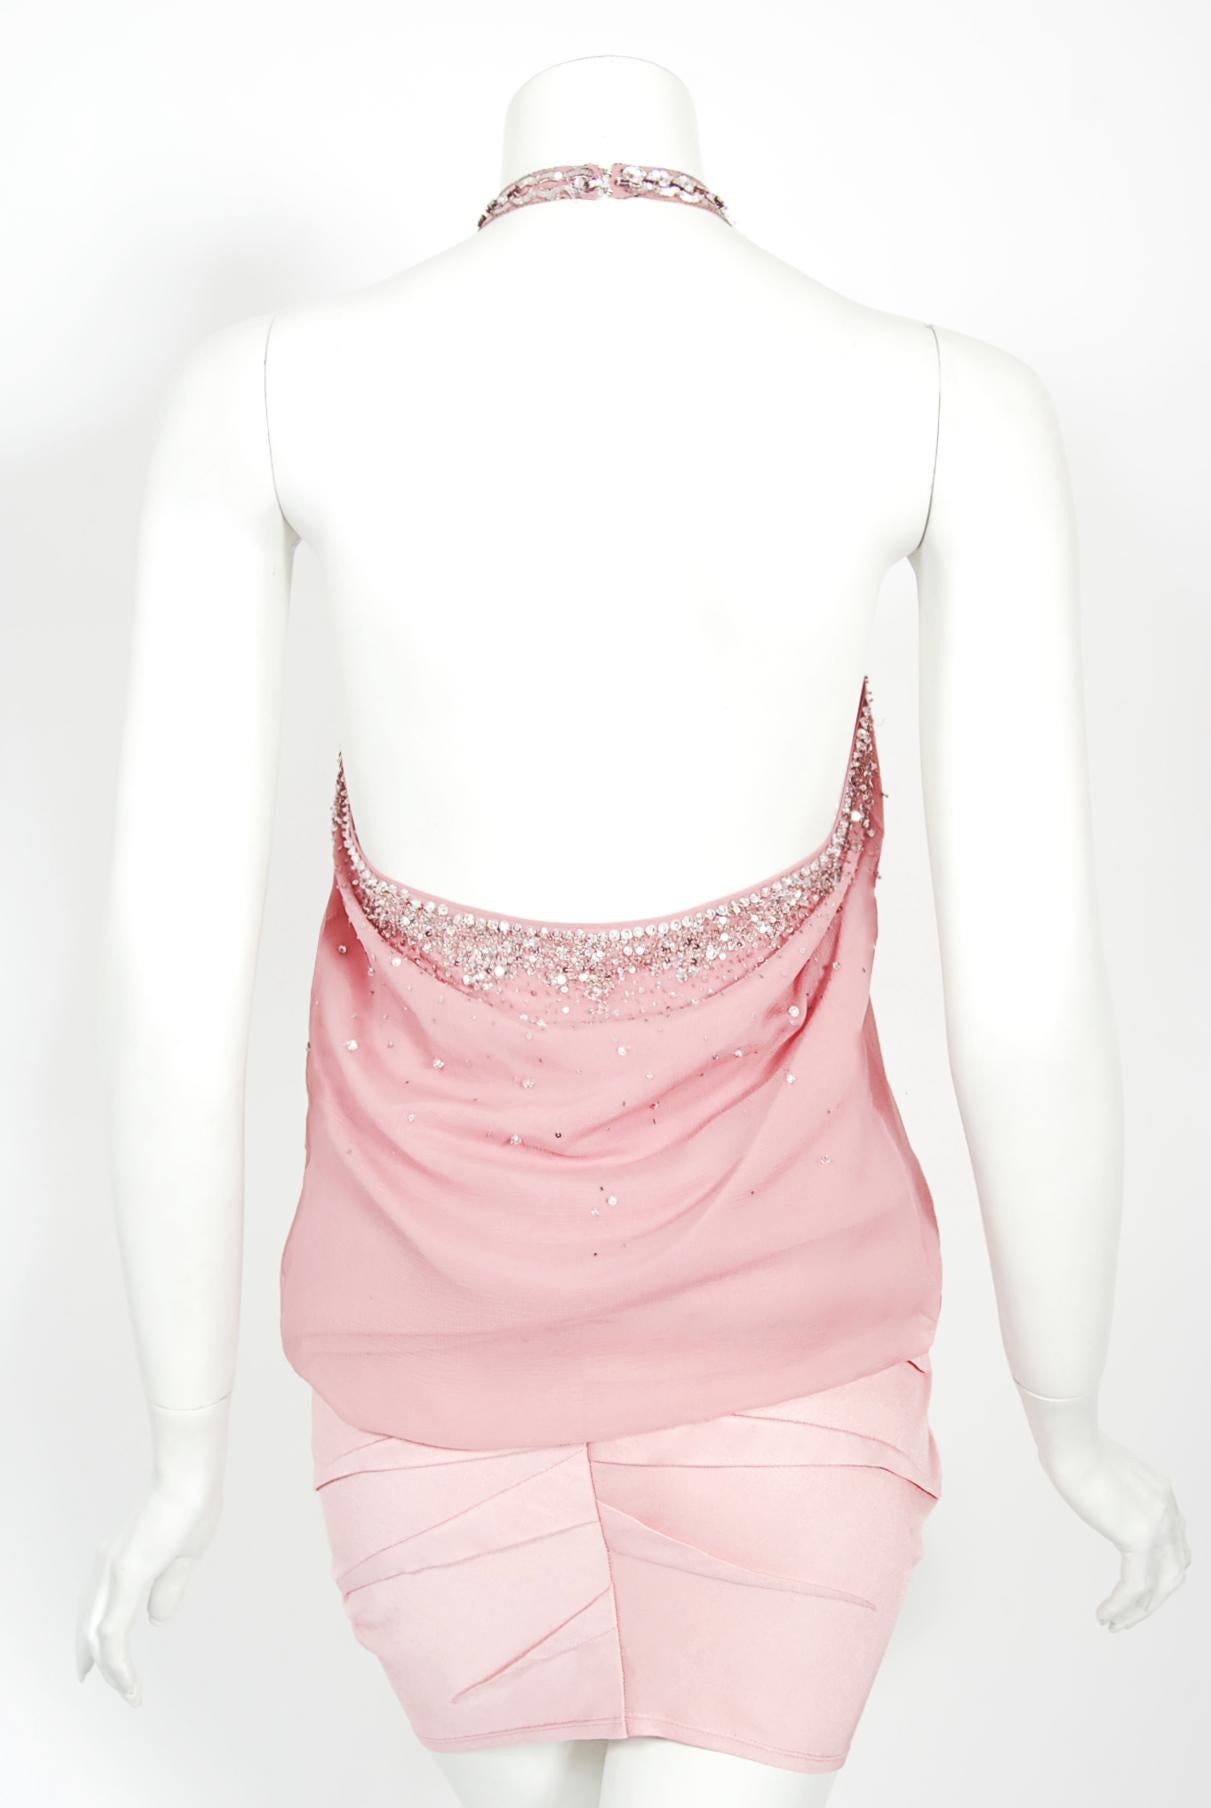 Vintage 2003 Christian Dior by Galliano Beaded Pale Pink Silk Flapper Mini Dress 8